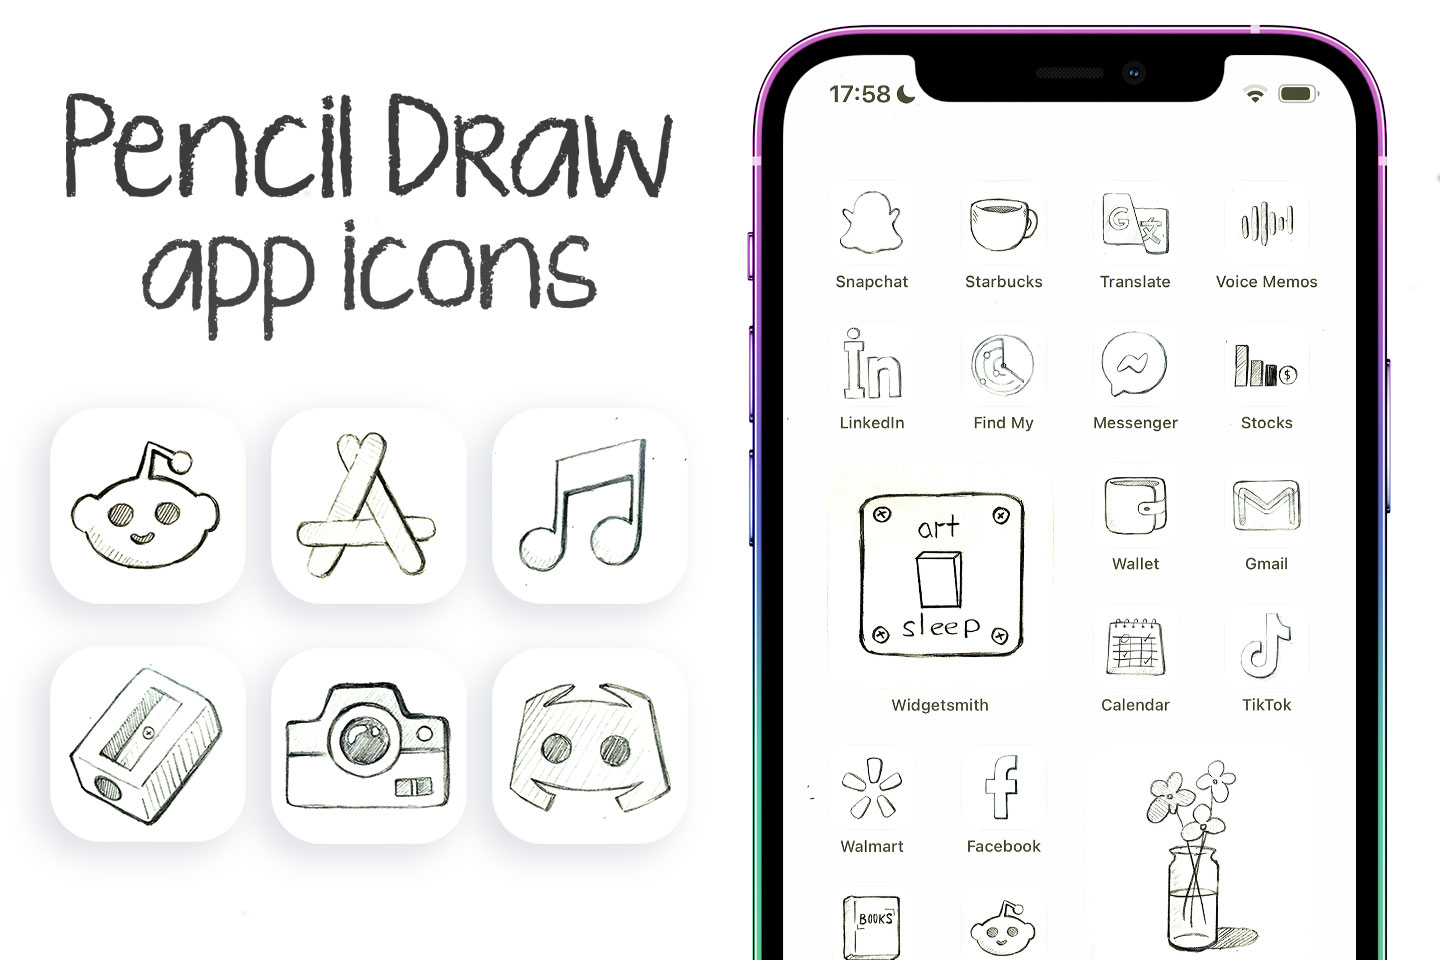 Pencil Draw App Icons iOS & Android Aesthetic App Icons for iP